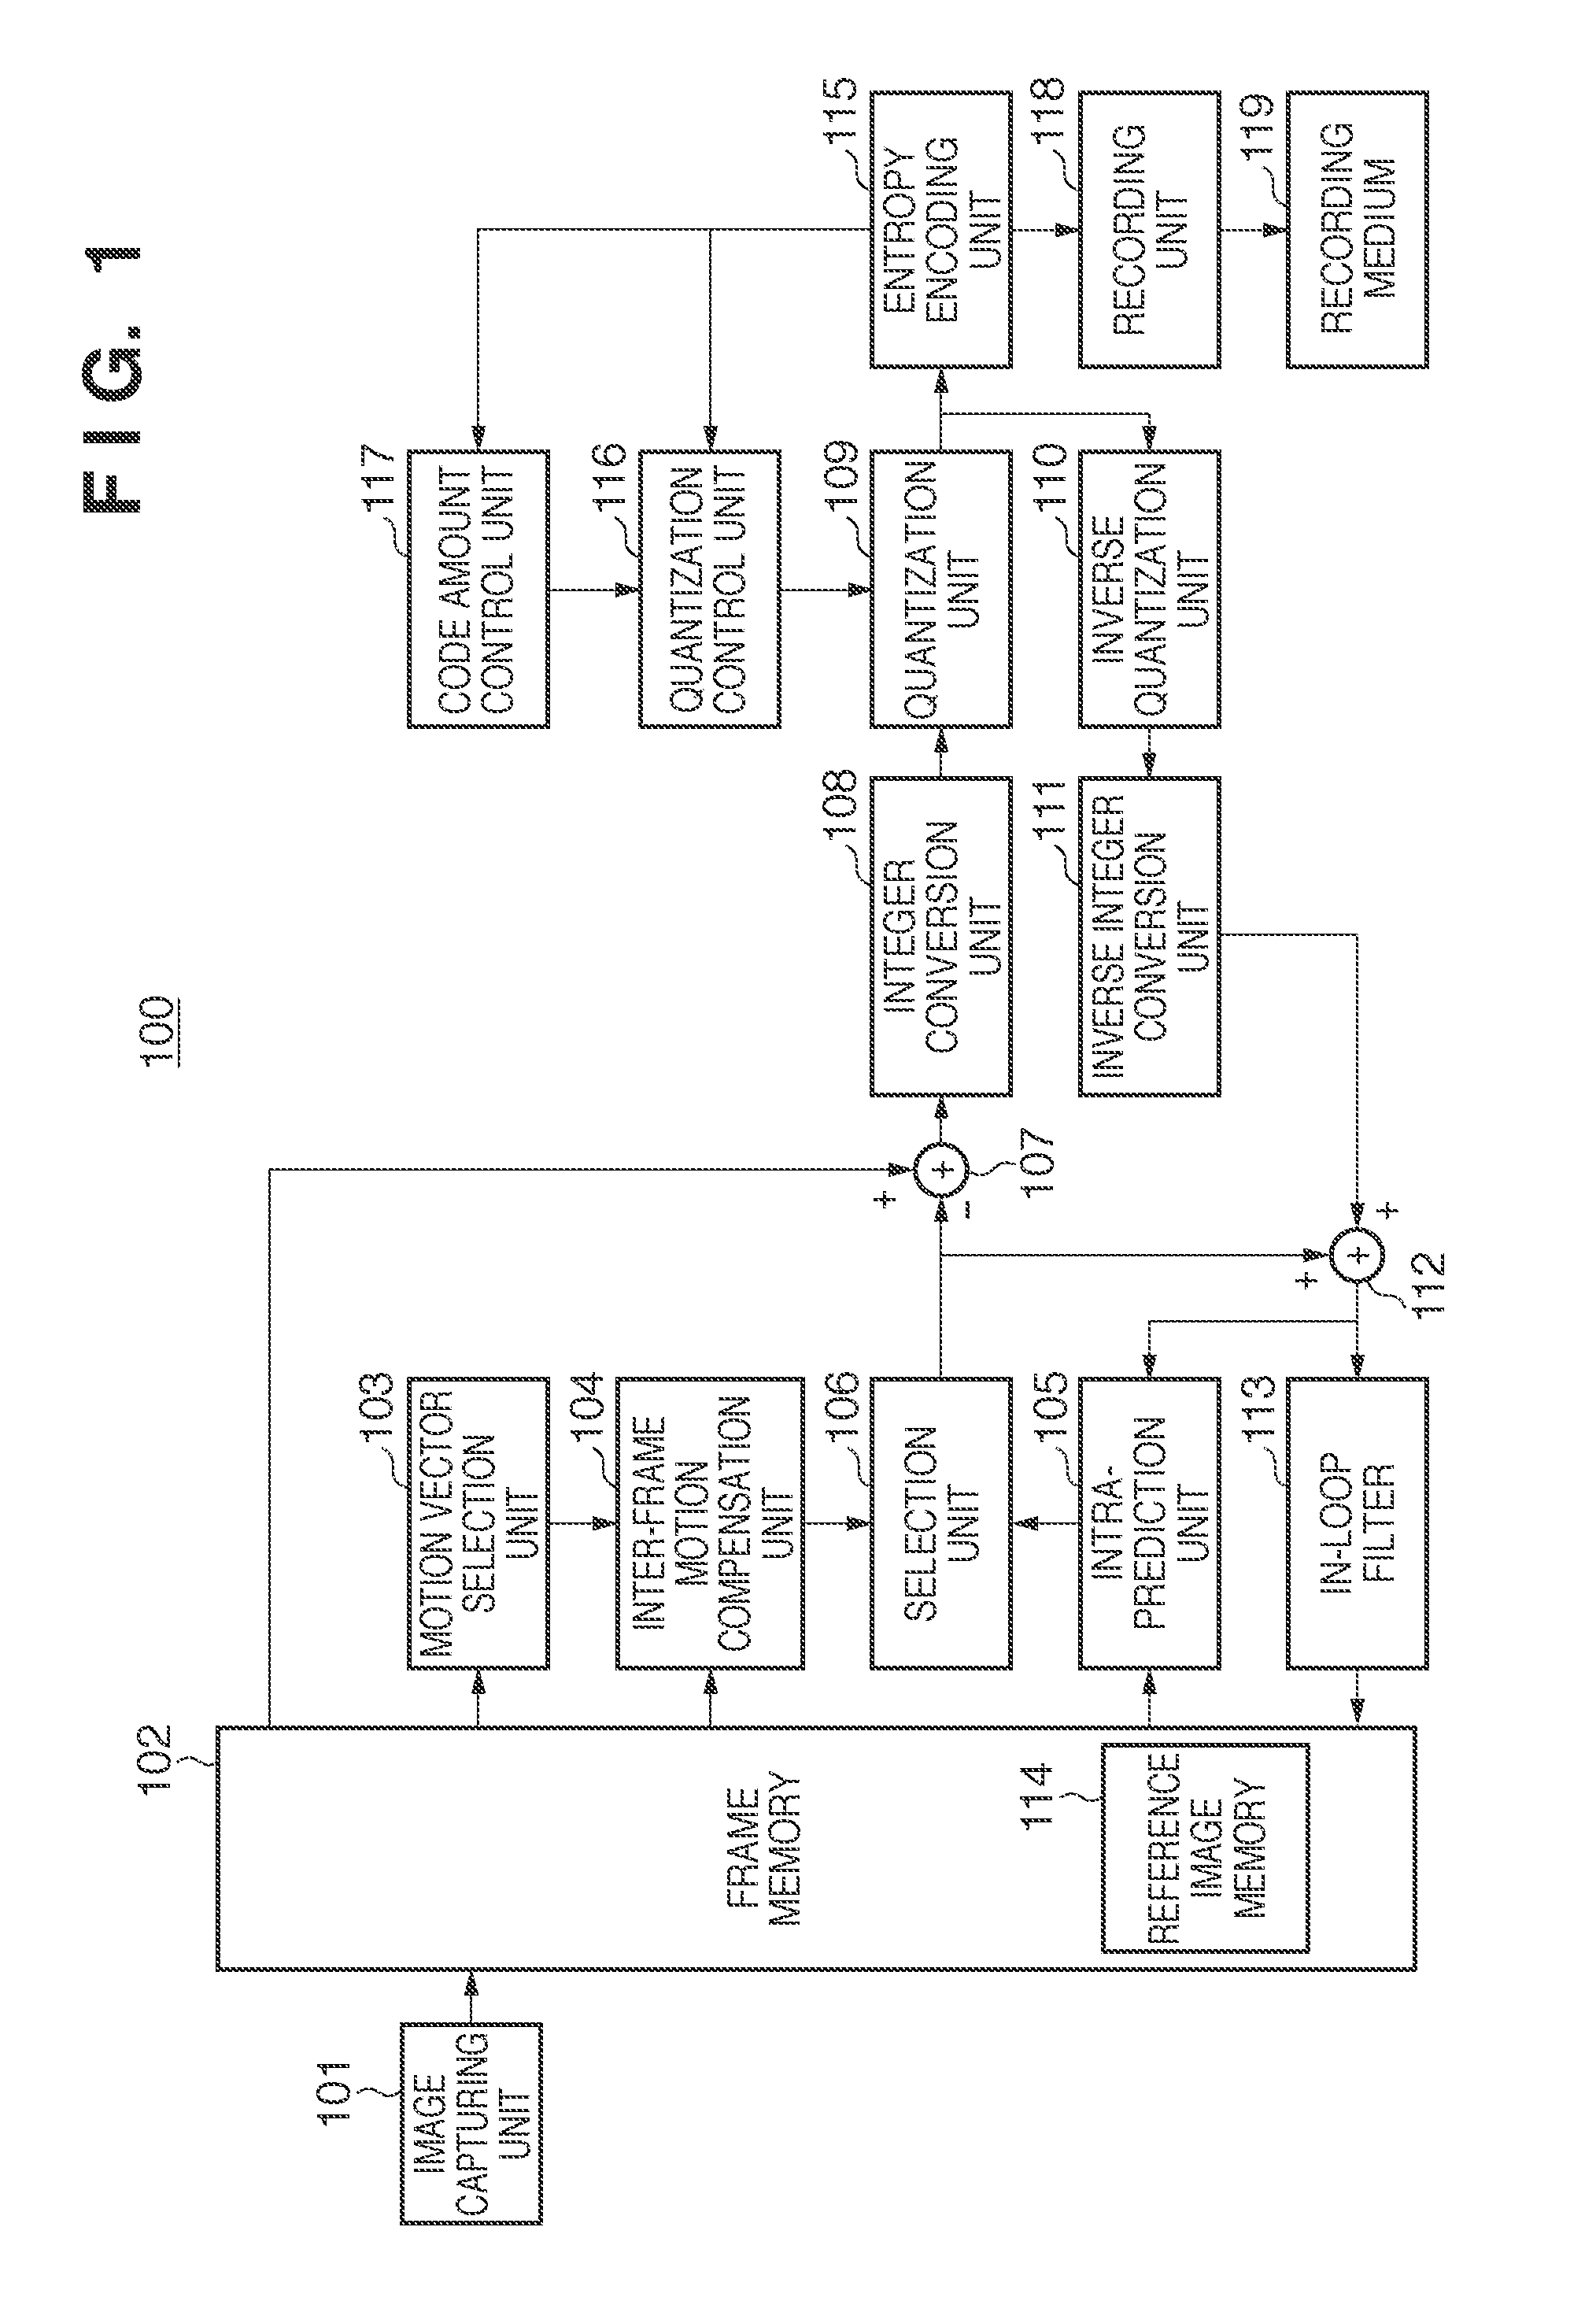 Moving image encoding apparatus and method of controlling the same